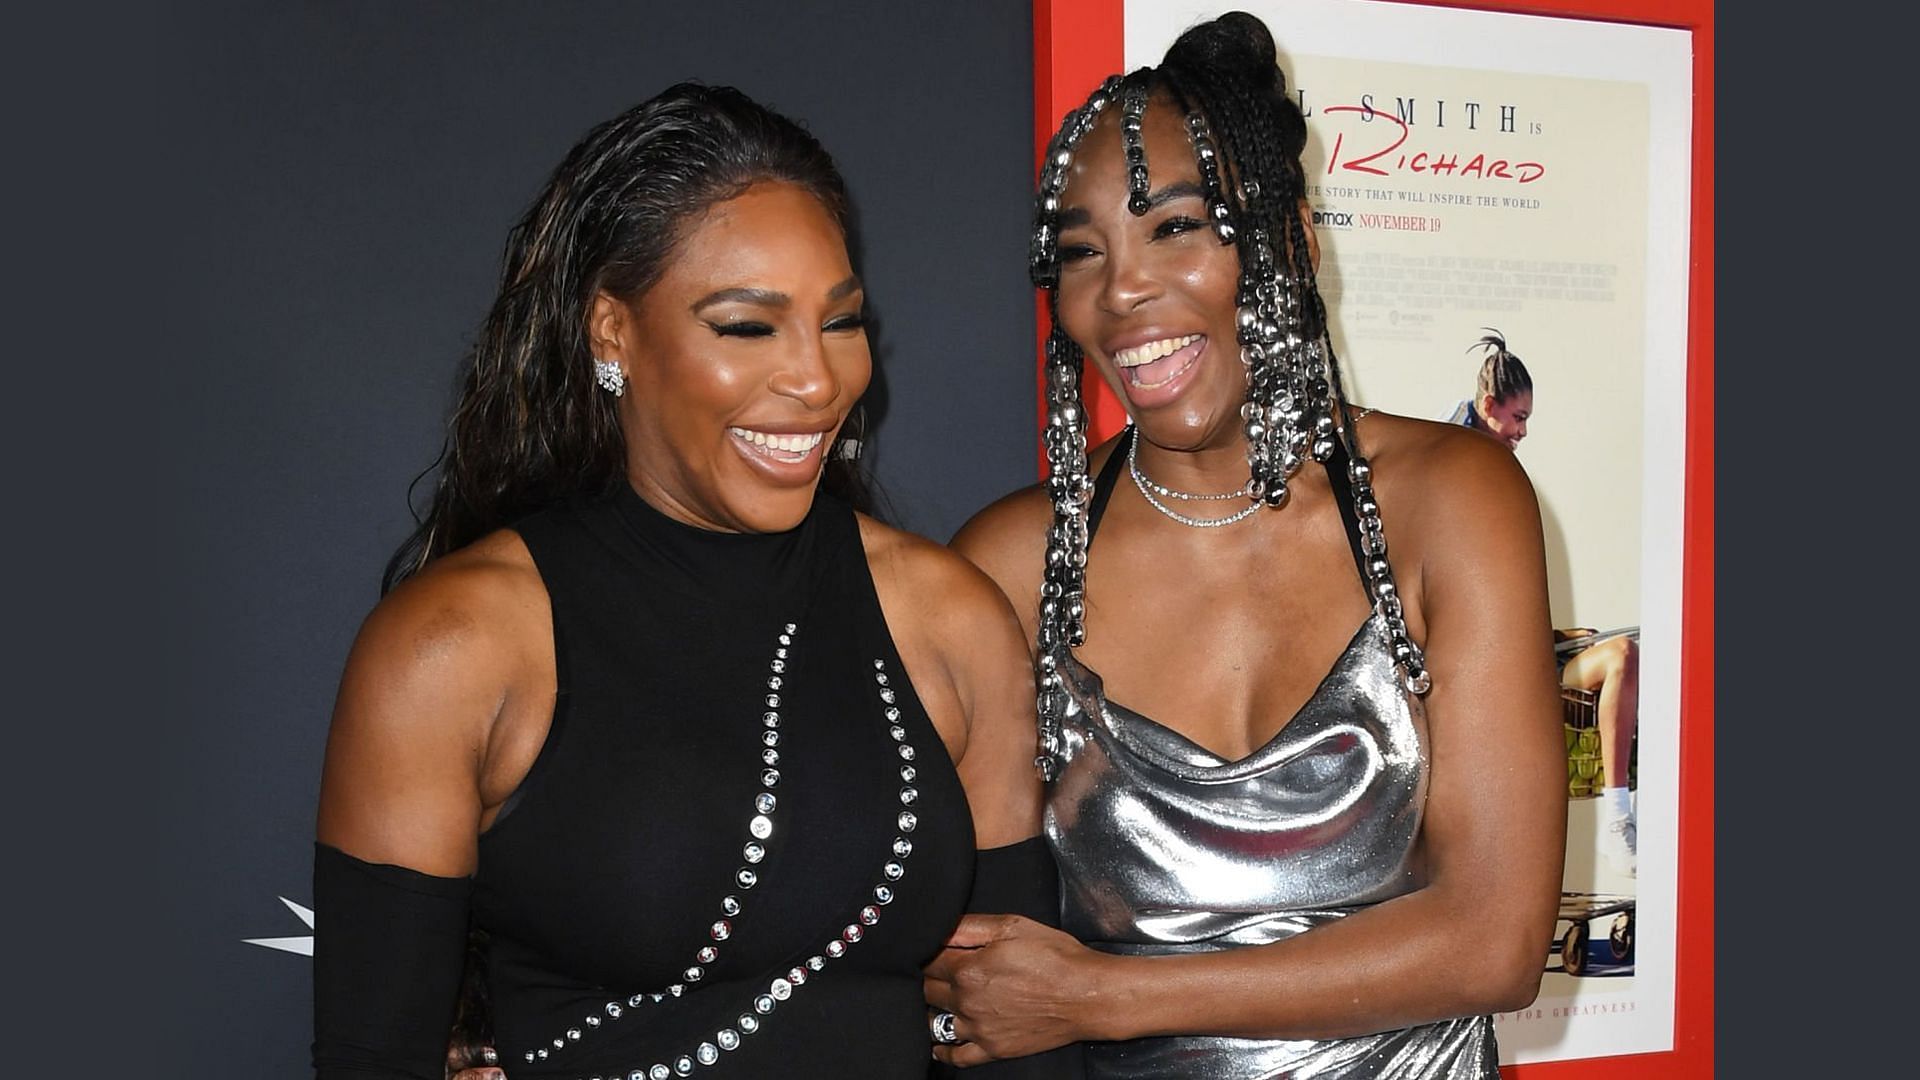 Venus Williams jokes about banning Serena Williams from her house